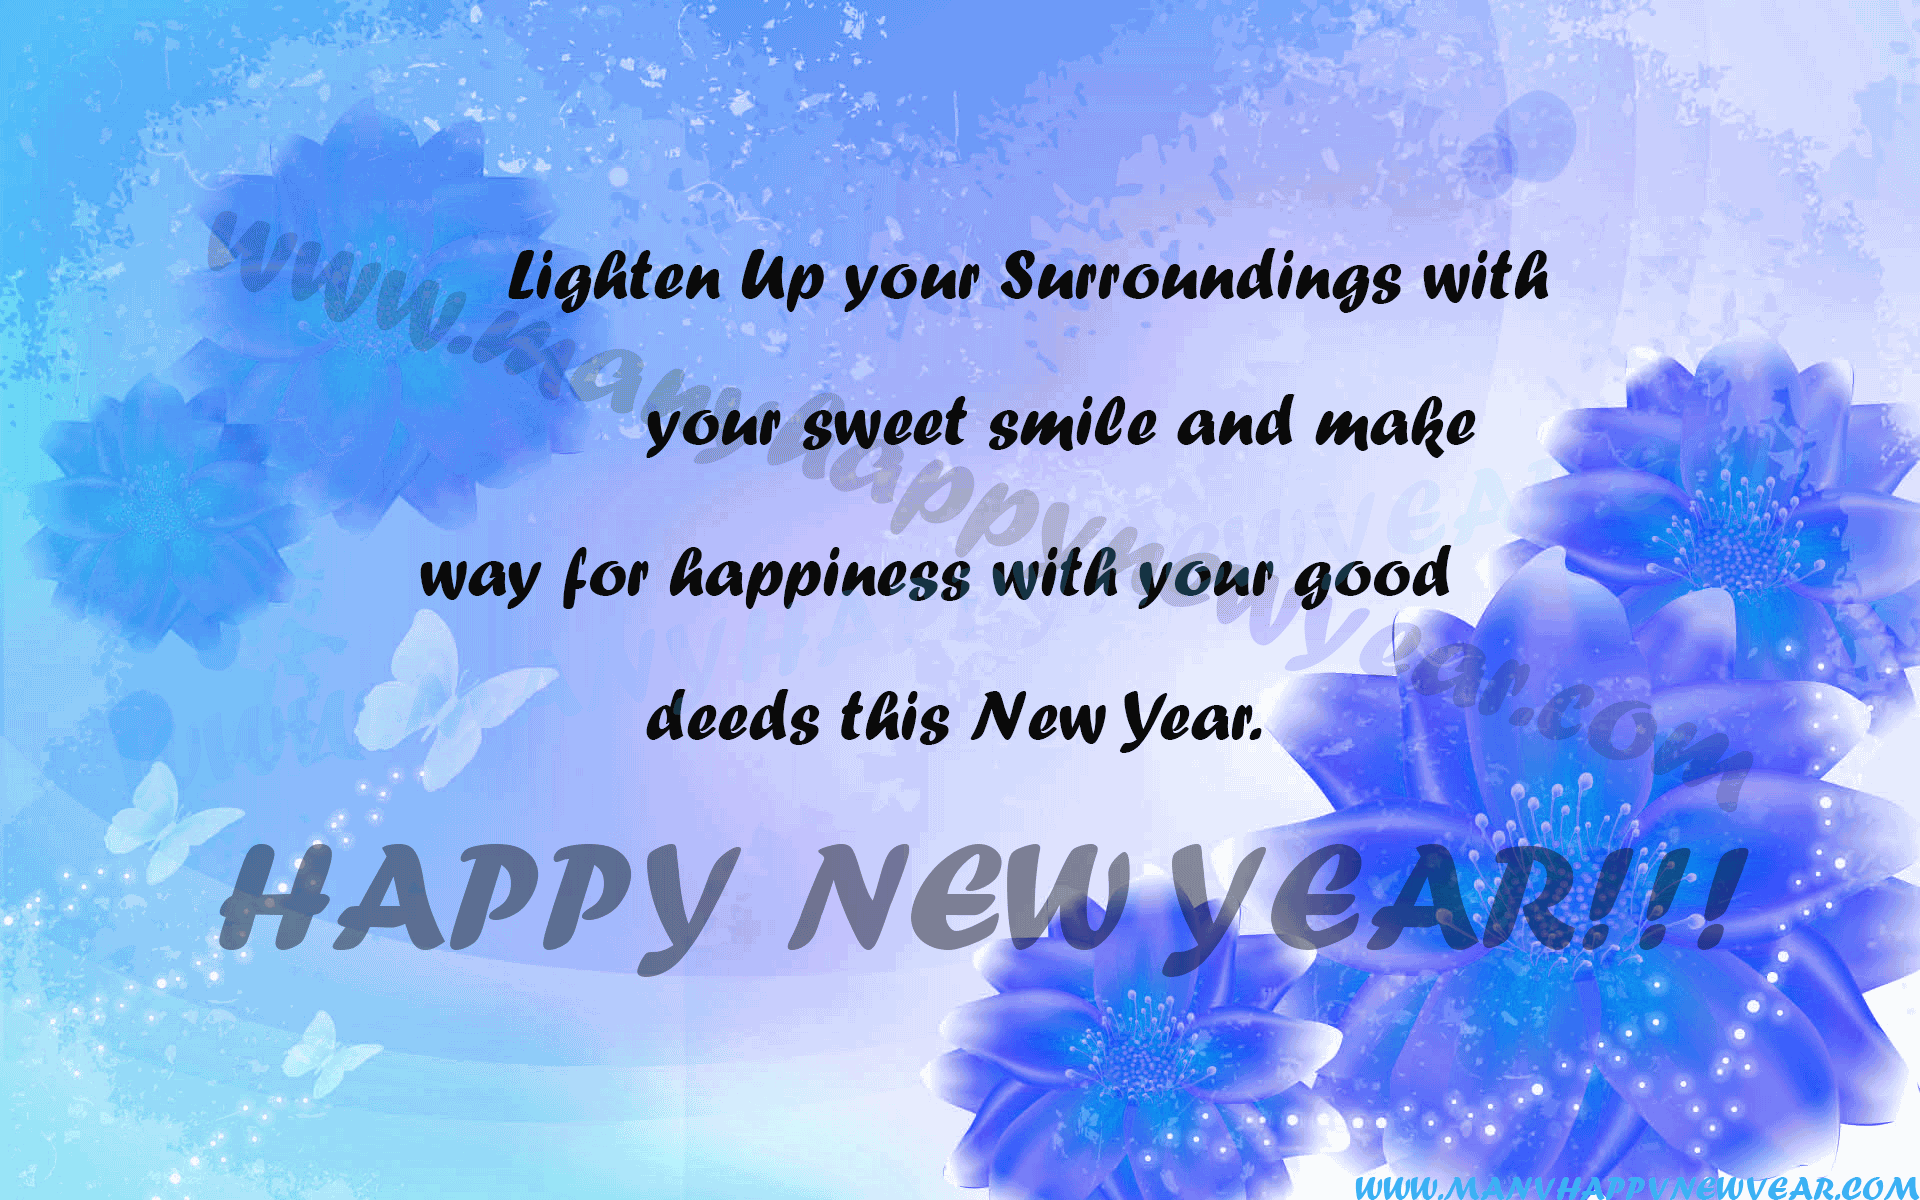 New Year 2018 Status Image Picture Photo Wallpaper - New Year Wishes Messages 2019 - HD Wallpaper 